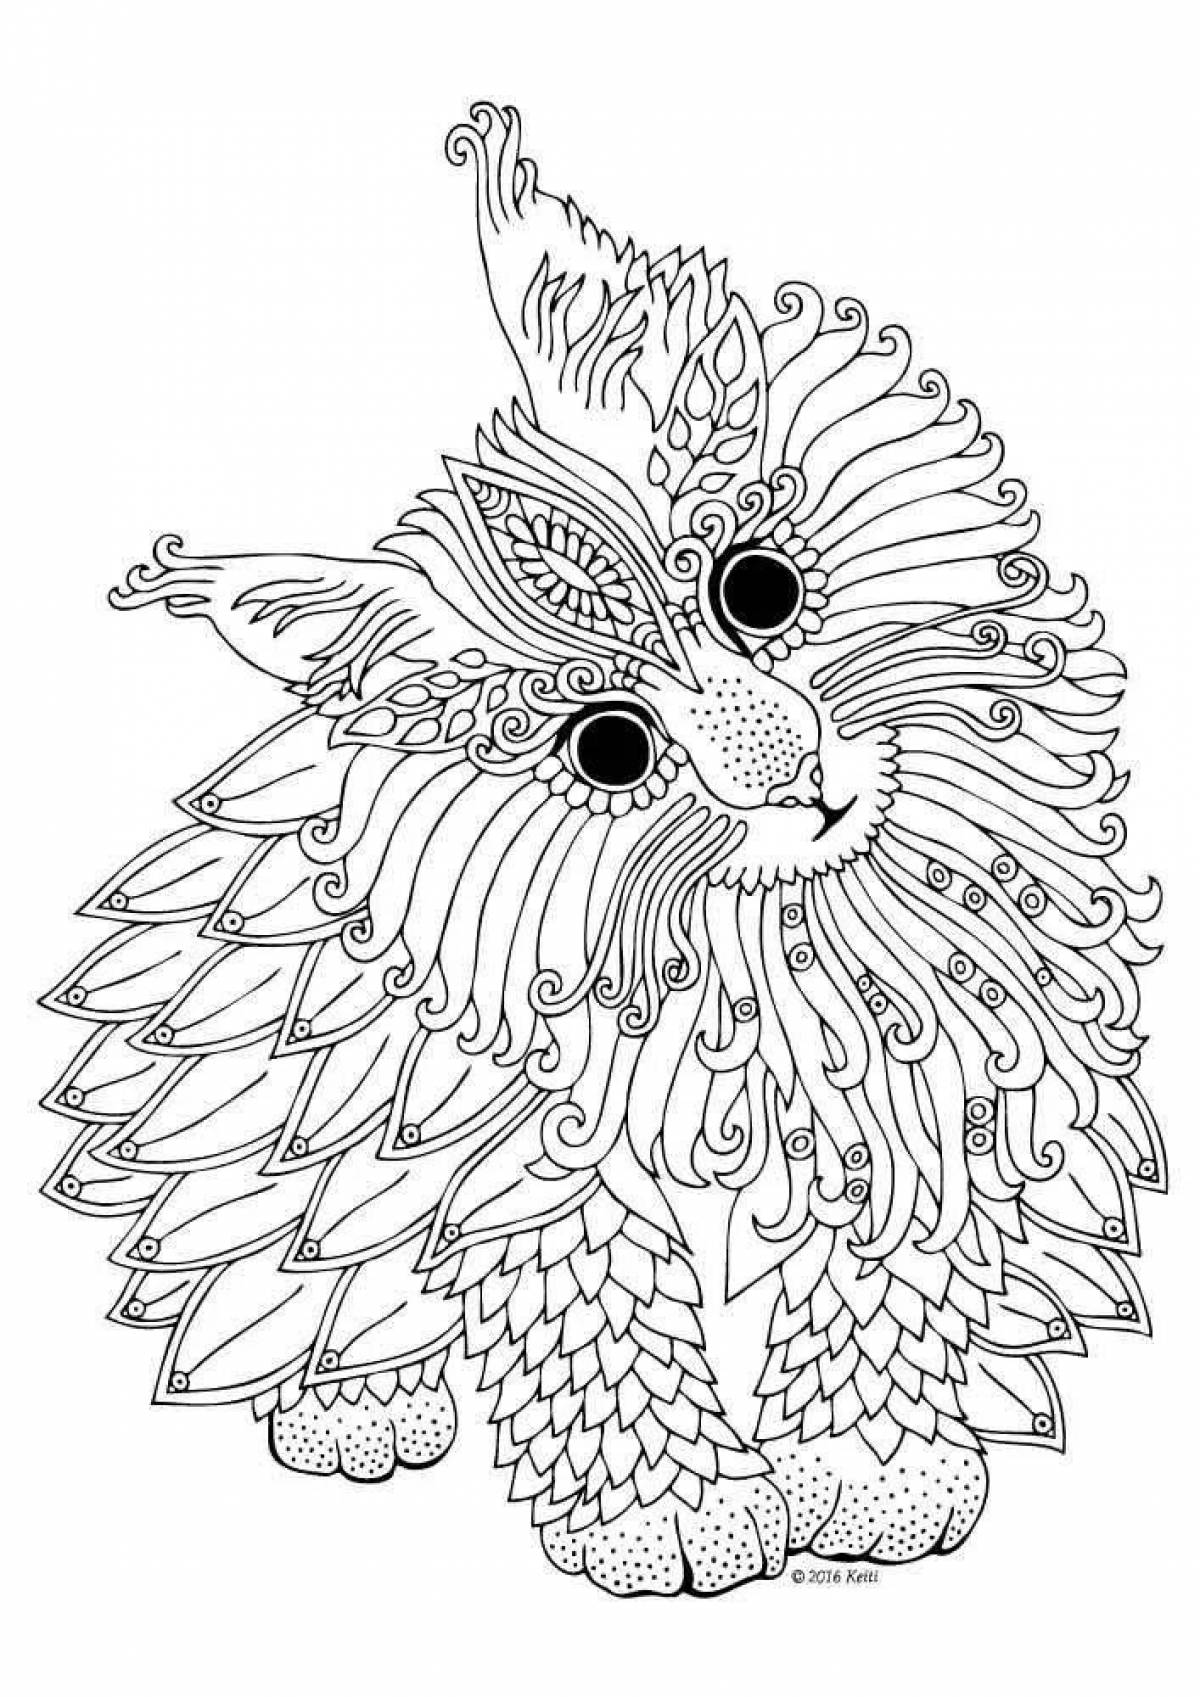 Adorable coloring book for girls animal complex